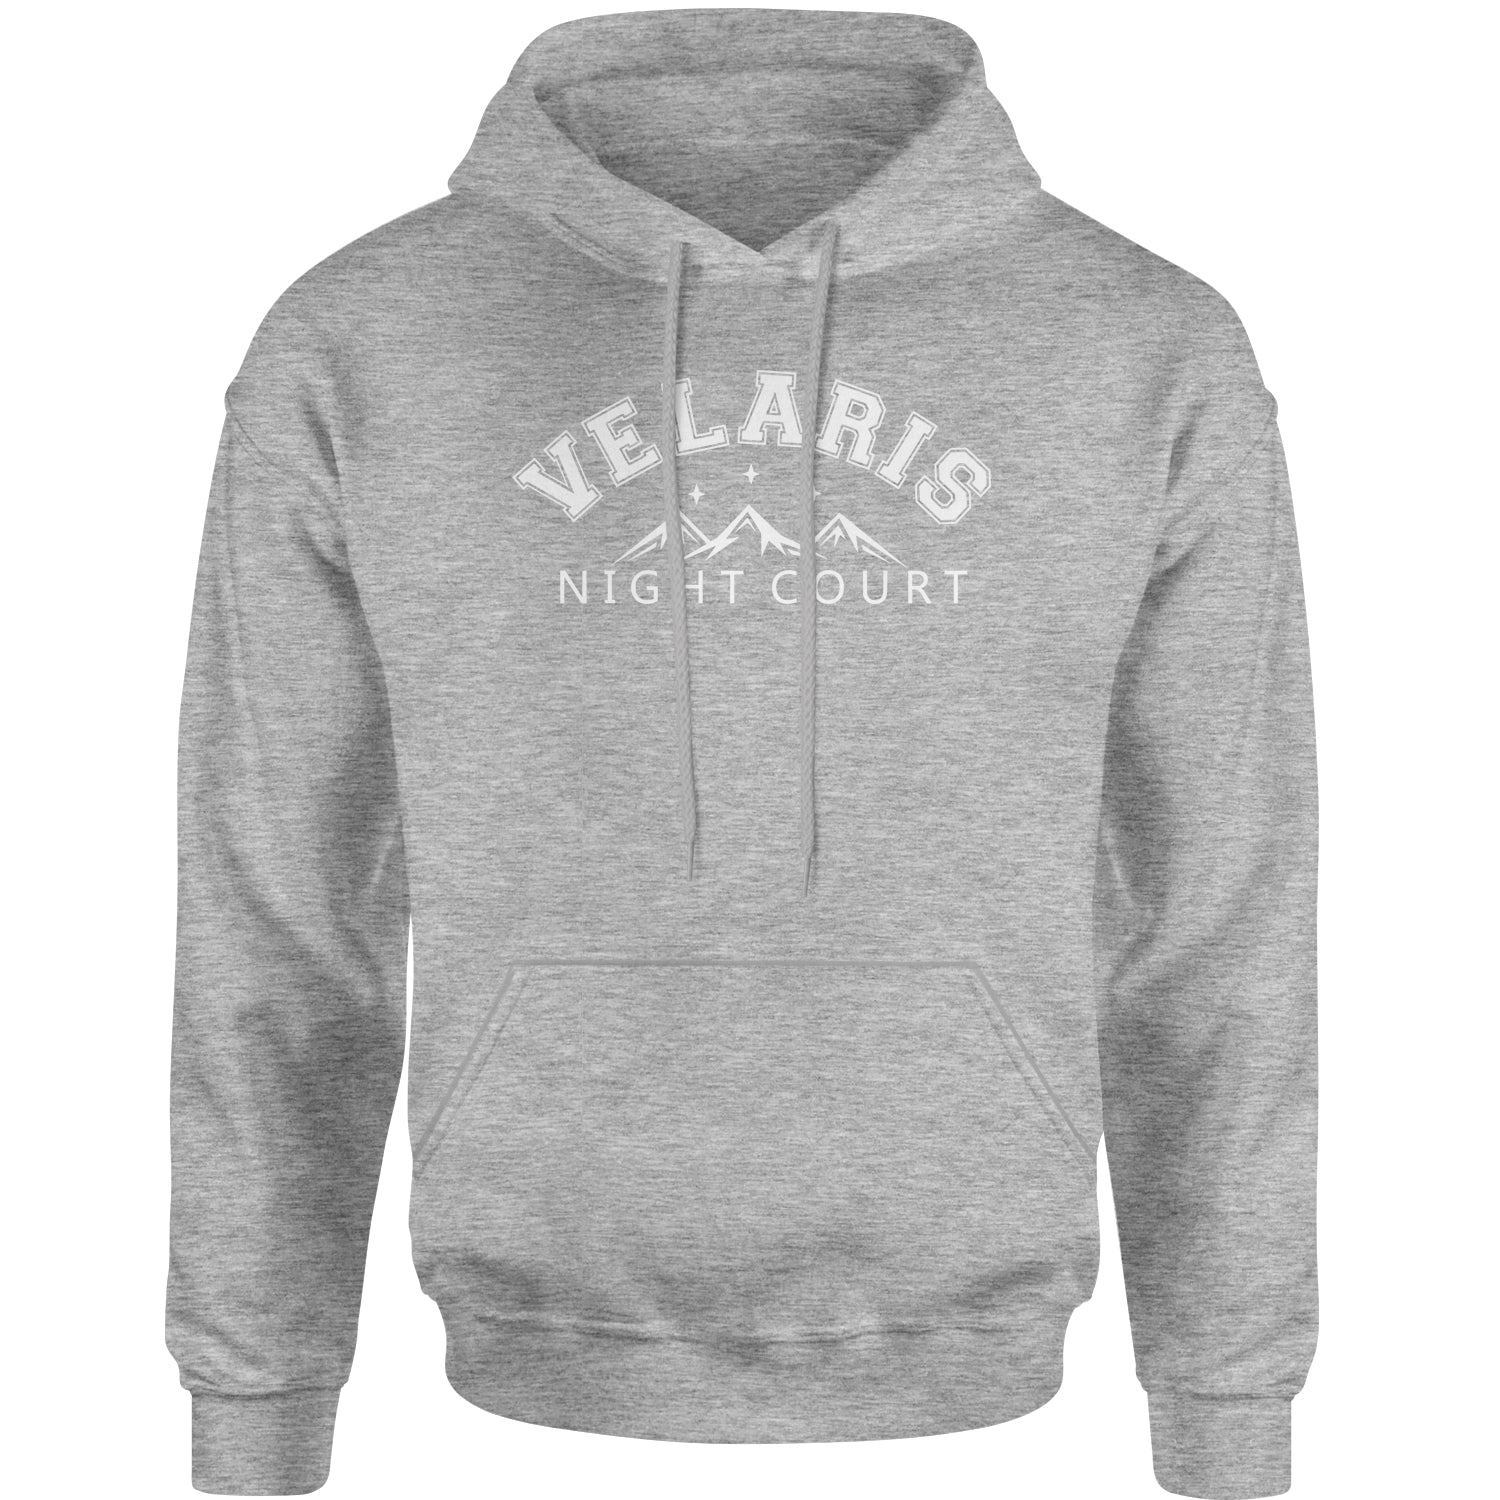 Velaris Night Court Squad Adult Hoodie Sweatshirt acotar, court, illyrian, maas, of, thorns by Expression Tees